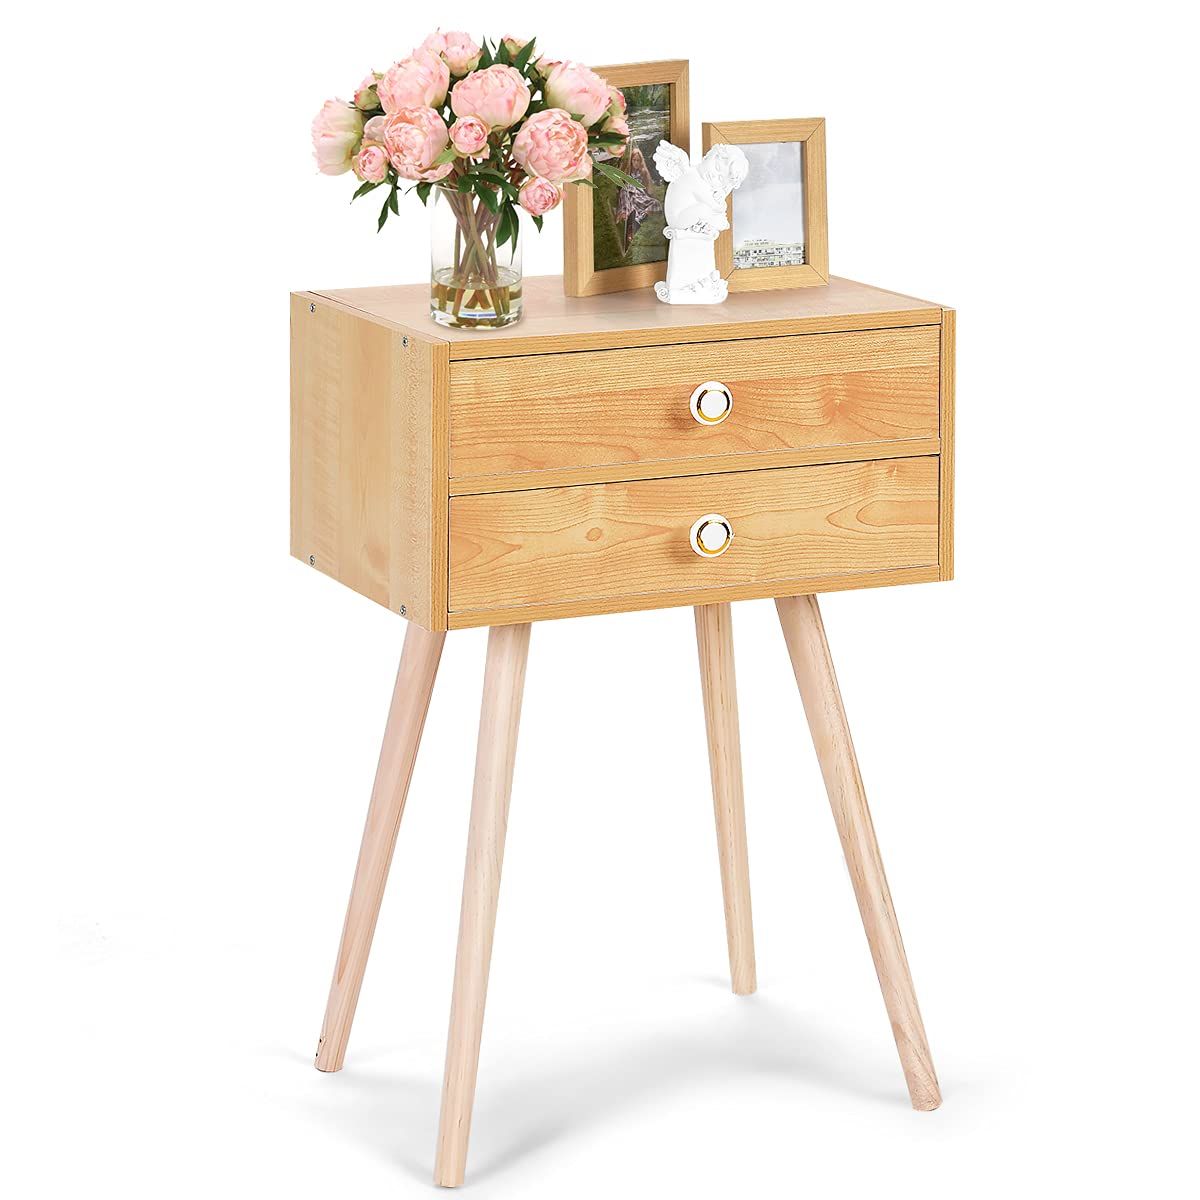 GIANTEX Nightstand w/2 Drawers, Home Furniture Bedside Table